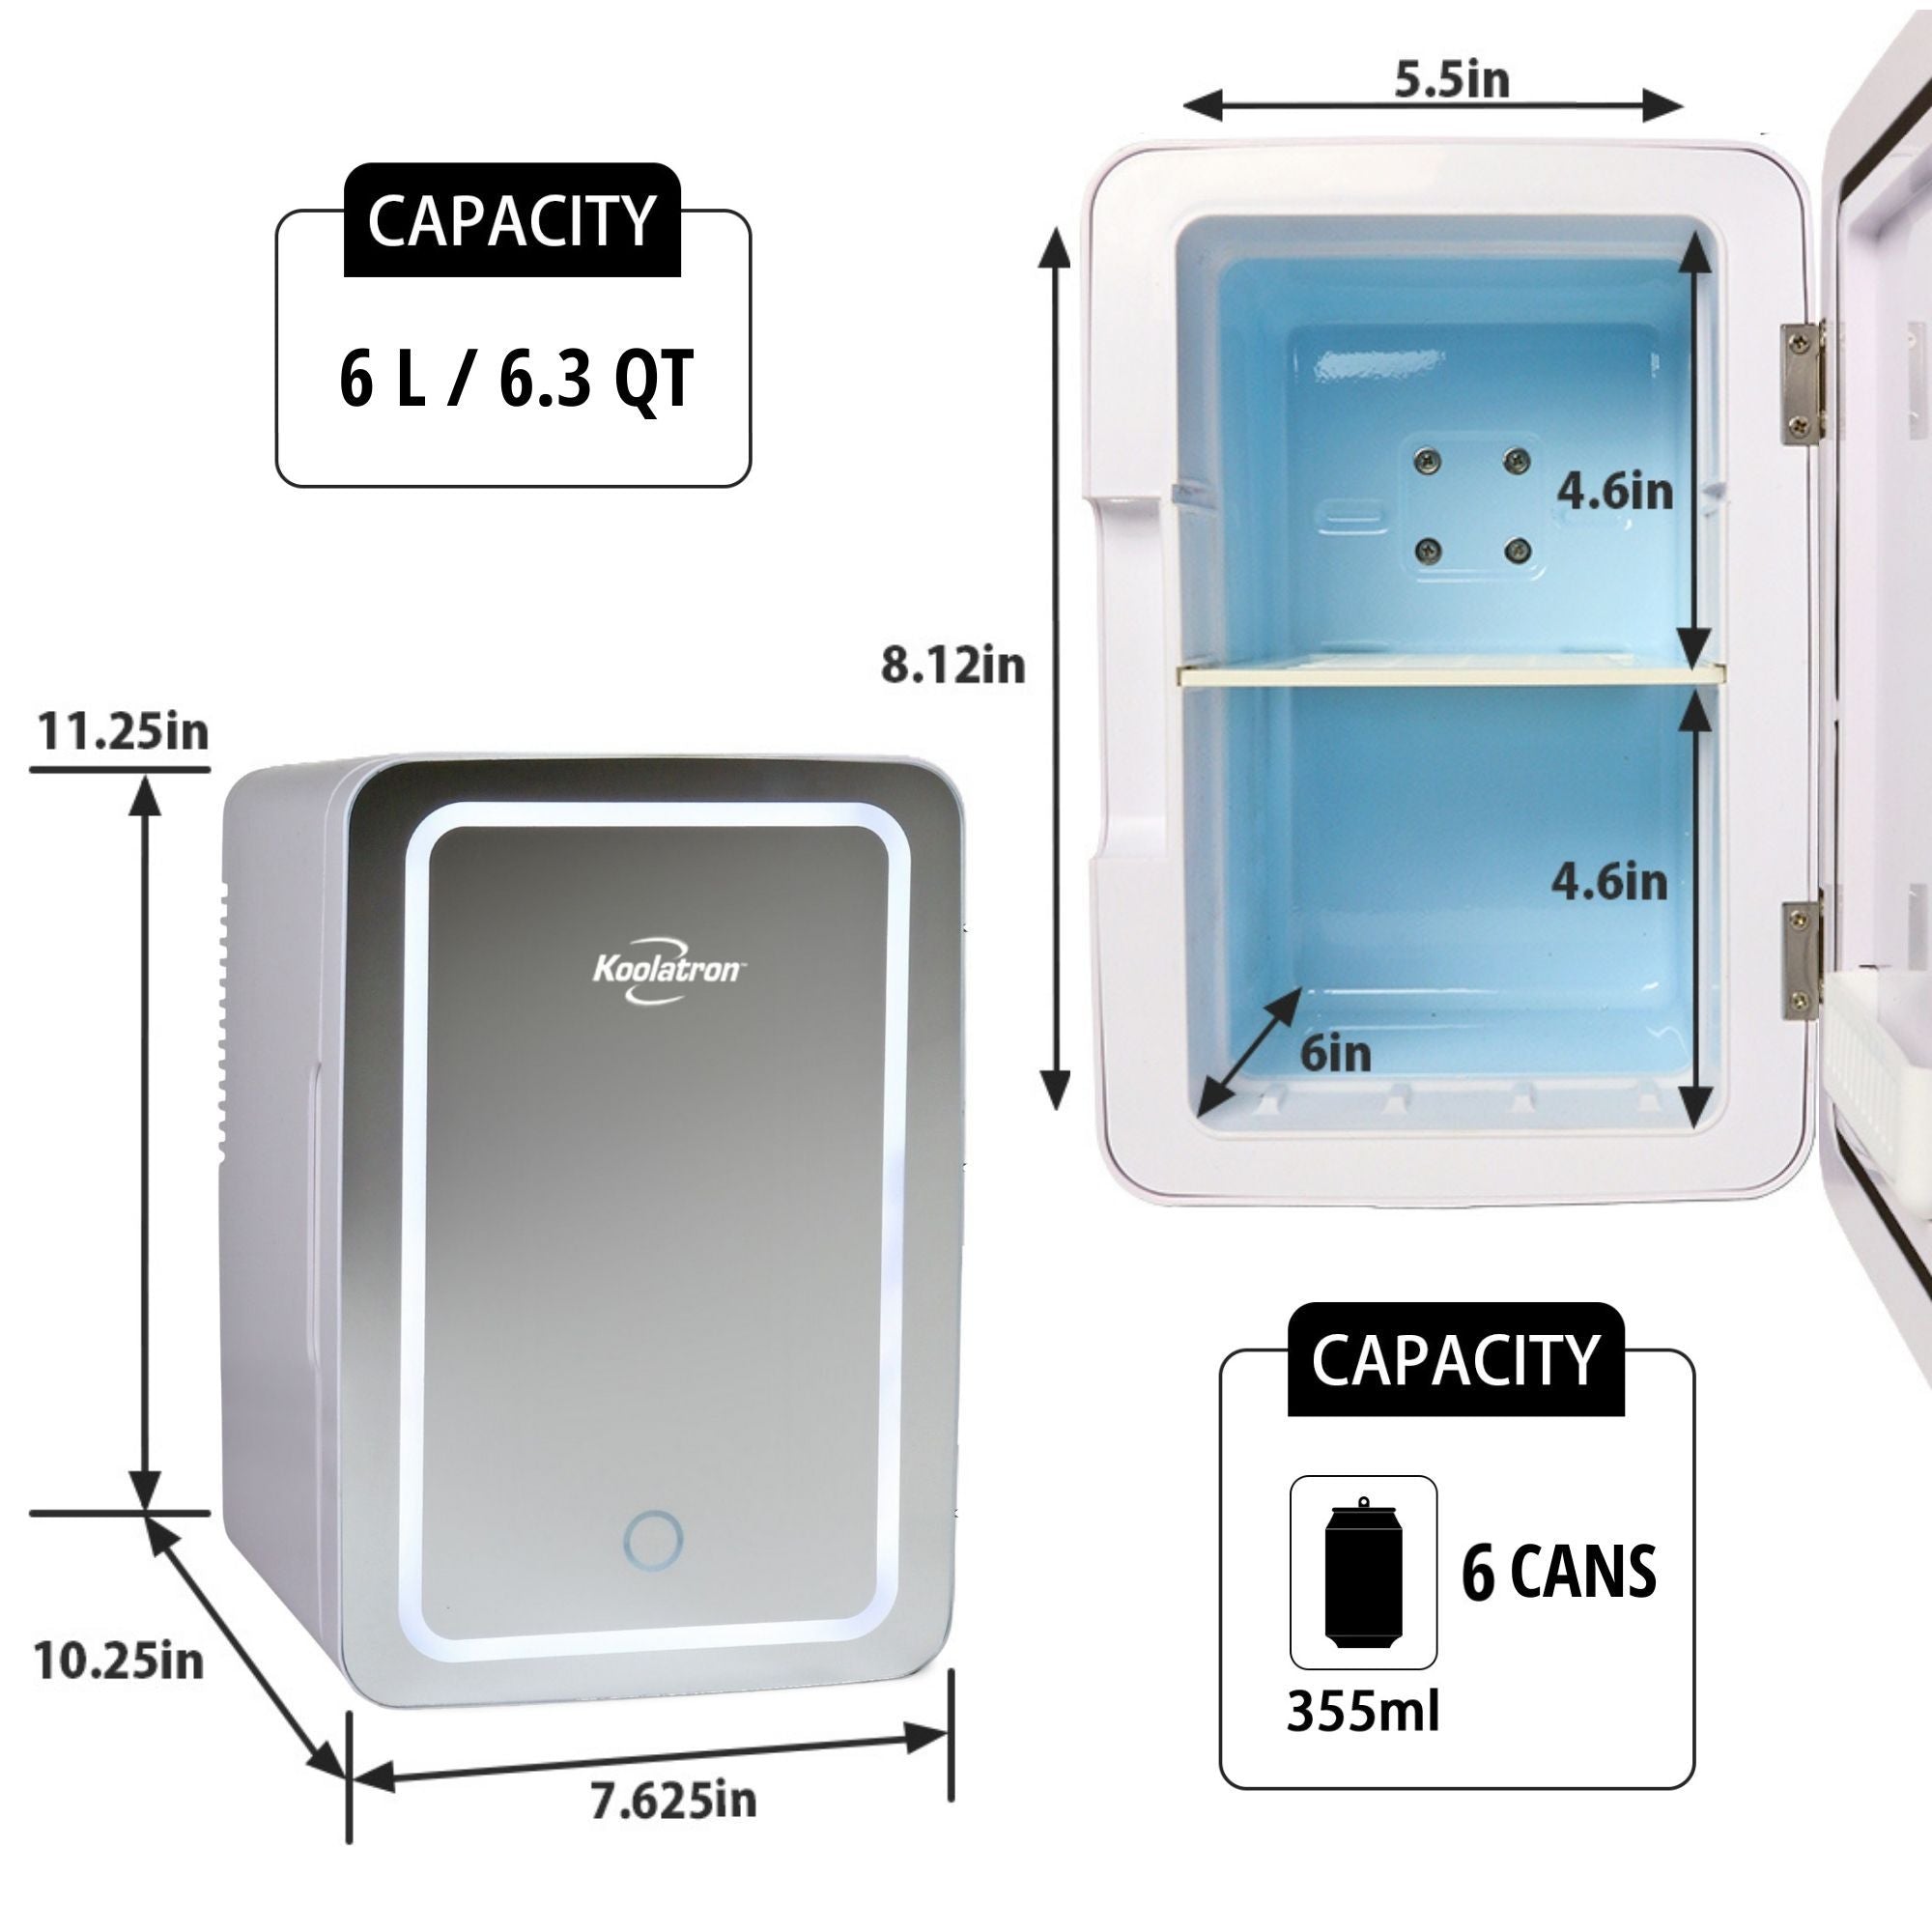 Two product shots on a white background show the cosmetics fridge with door open and interior dimensions labeled and door closed and exterior dimensions labeled. Text above reads, "Capacity: 6L/6.3 qt" and text below reads, "Capacity: 6 cans (355 mL)"